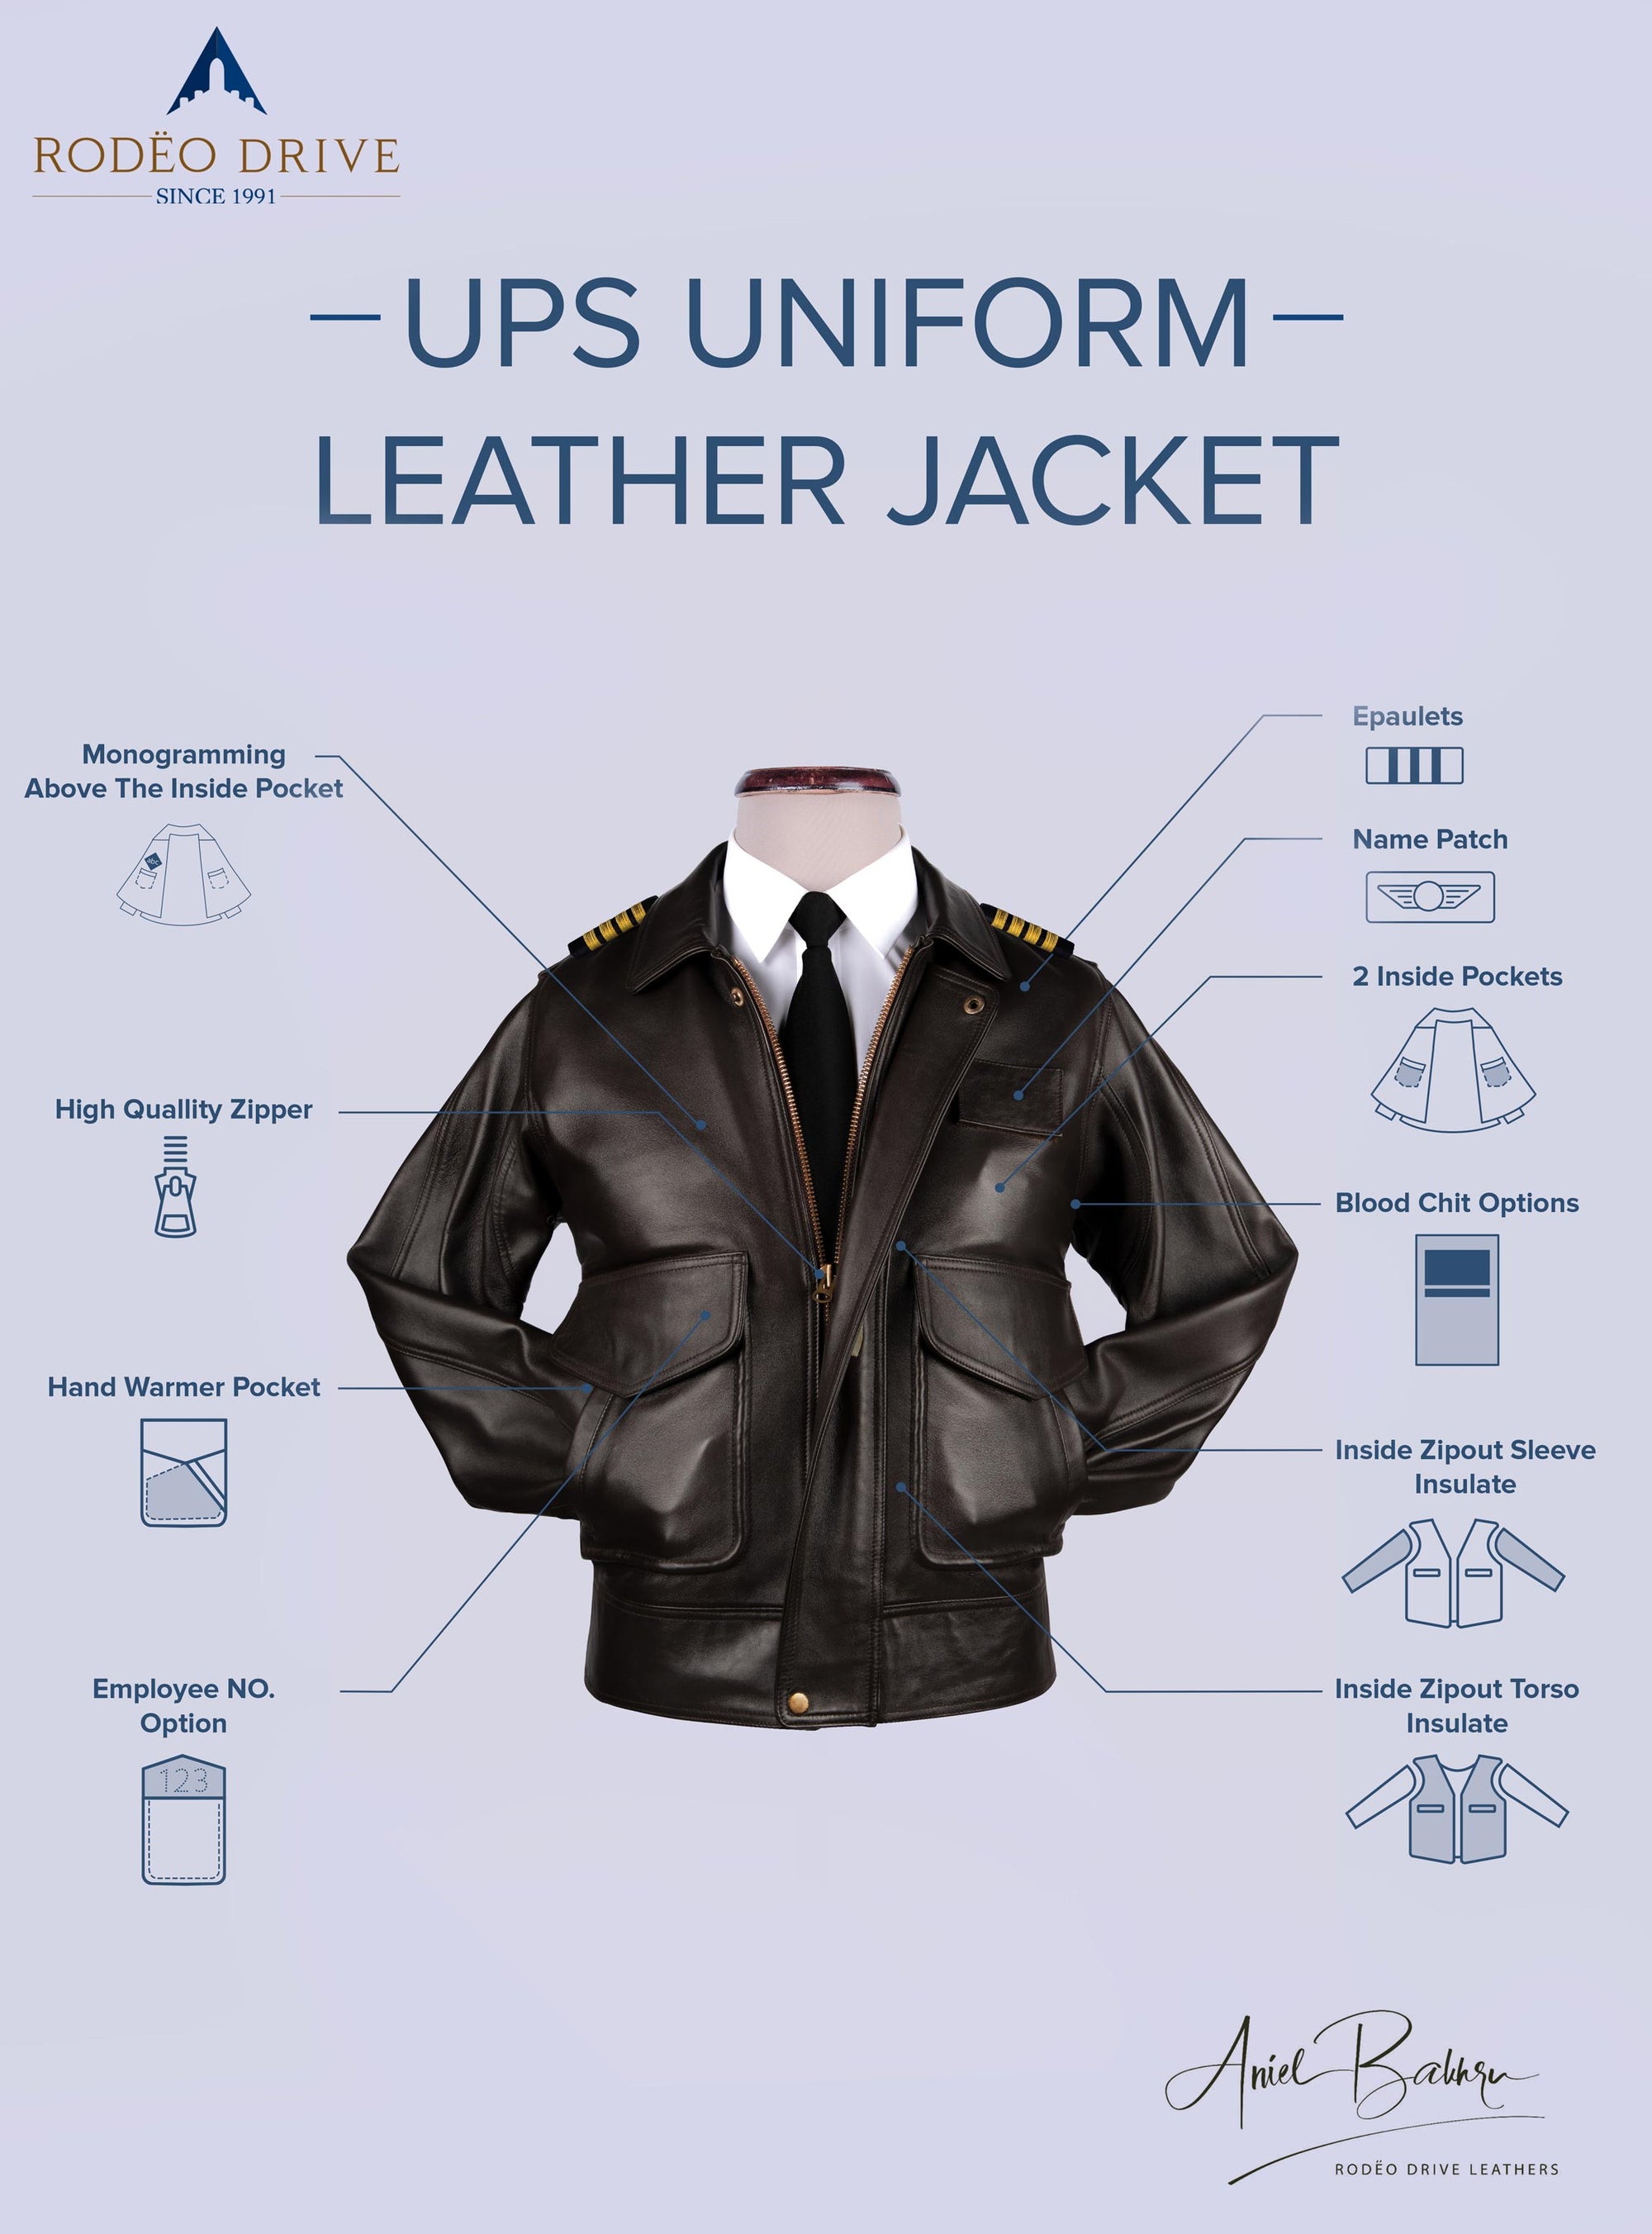 Anatomy of BROWN UNIFORM LEATHER JACKET for WOMEN. different parts of it are nicely expllained